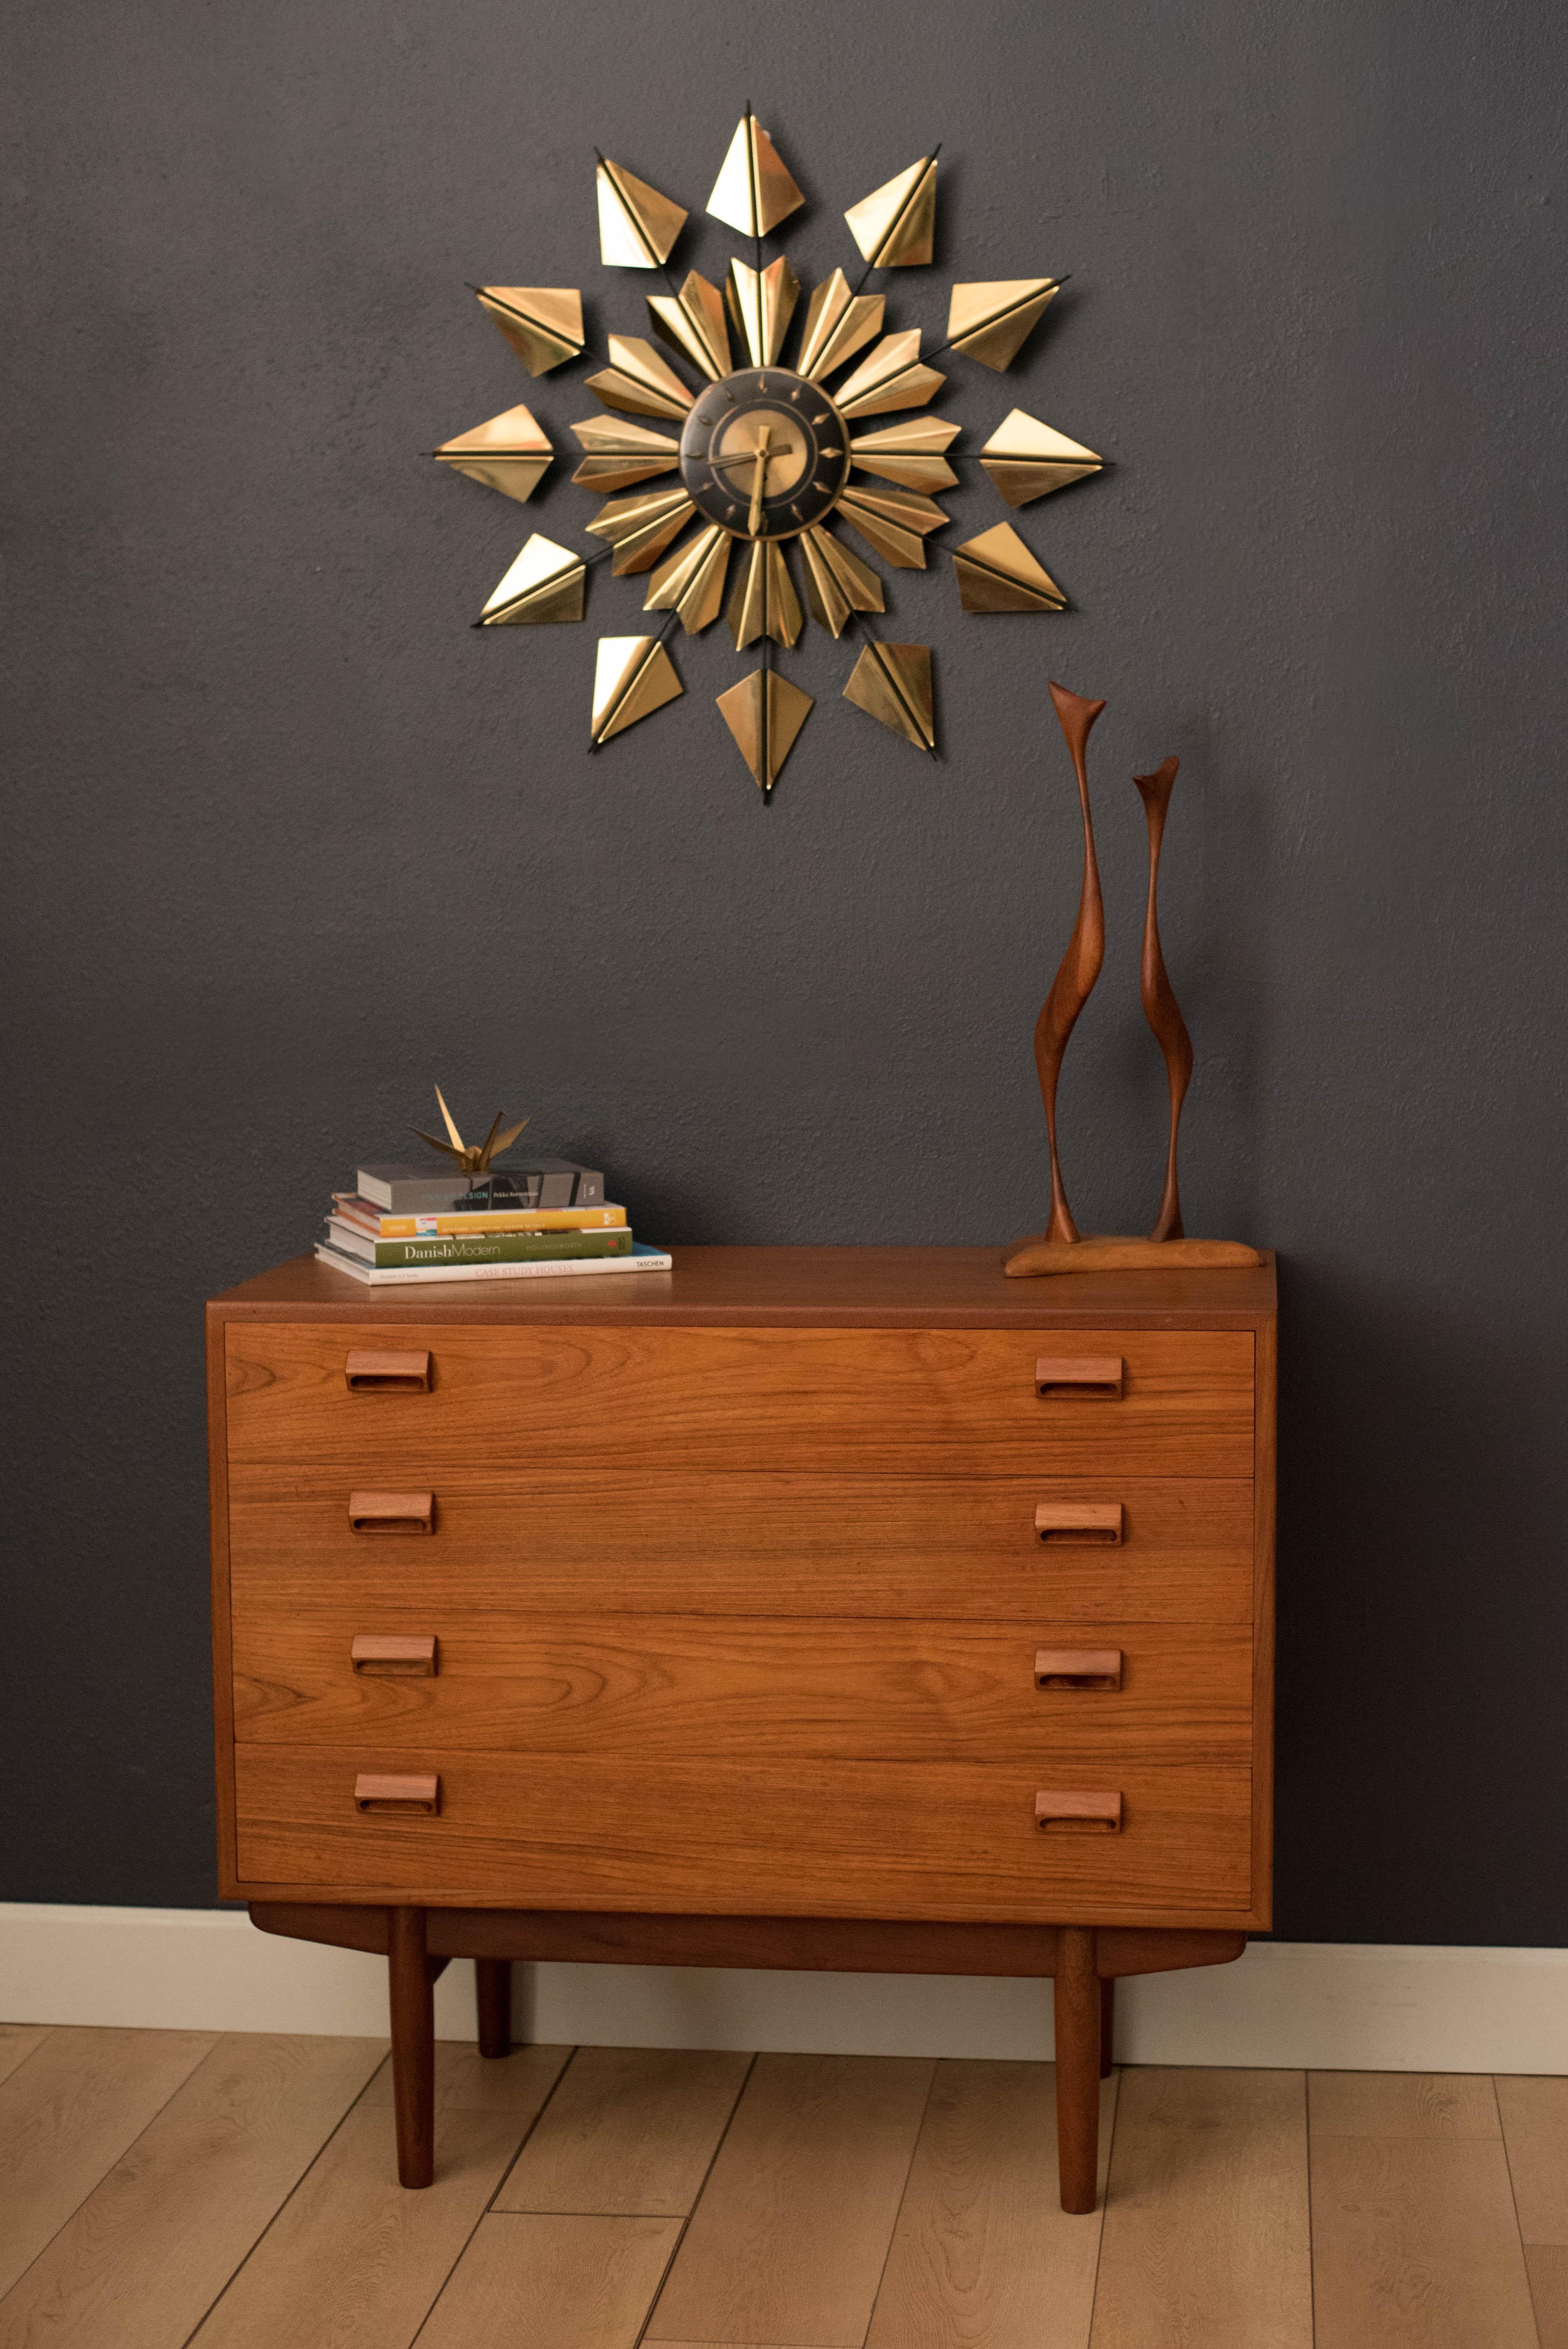 Midcentury sunburst clock in brass, circa 1960s. This oversized vintage wall clock makes a bold statement in black and gold that creates a great focal point for any space. Made by Welby and includes the original wind up key.